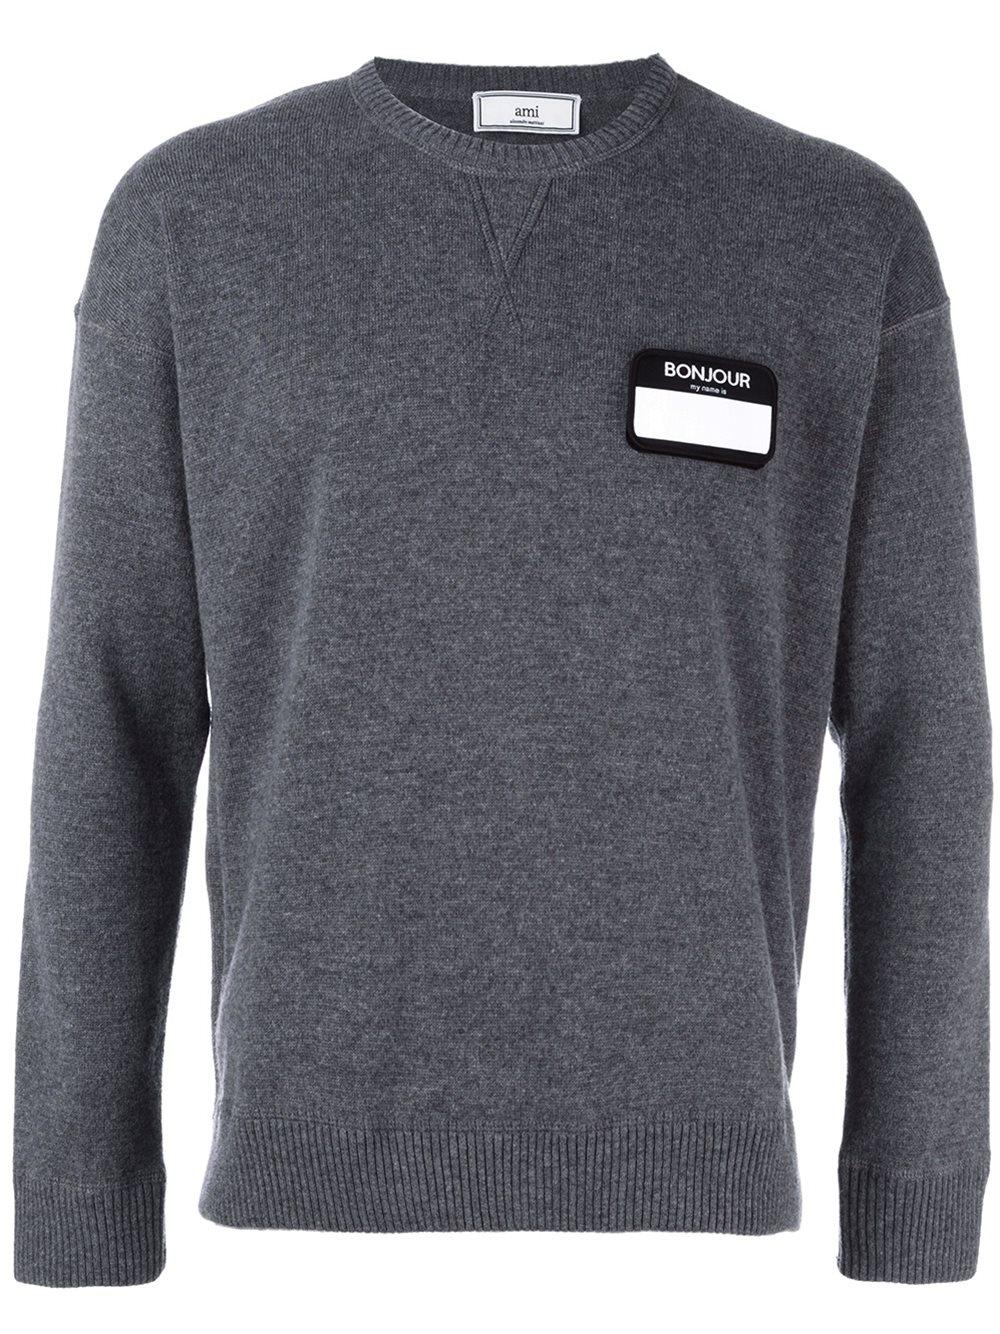 Ami Name Tag Patch Jumper in Gray for Men - Save 43% | Lyst